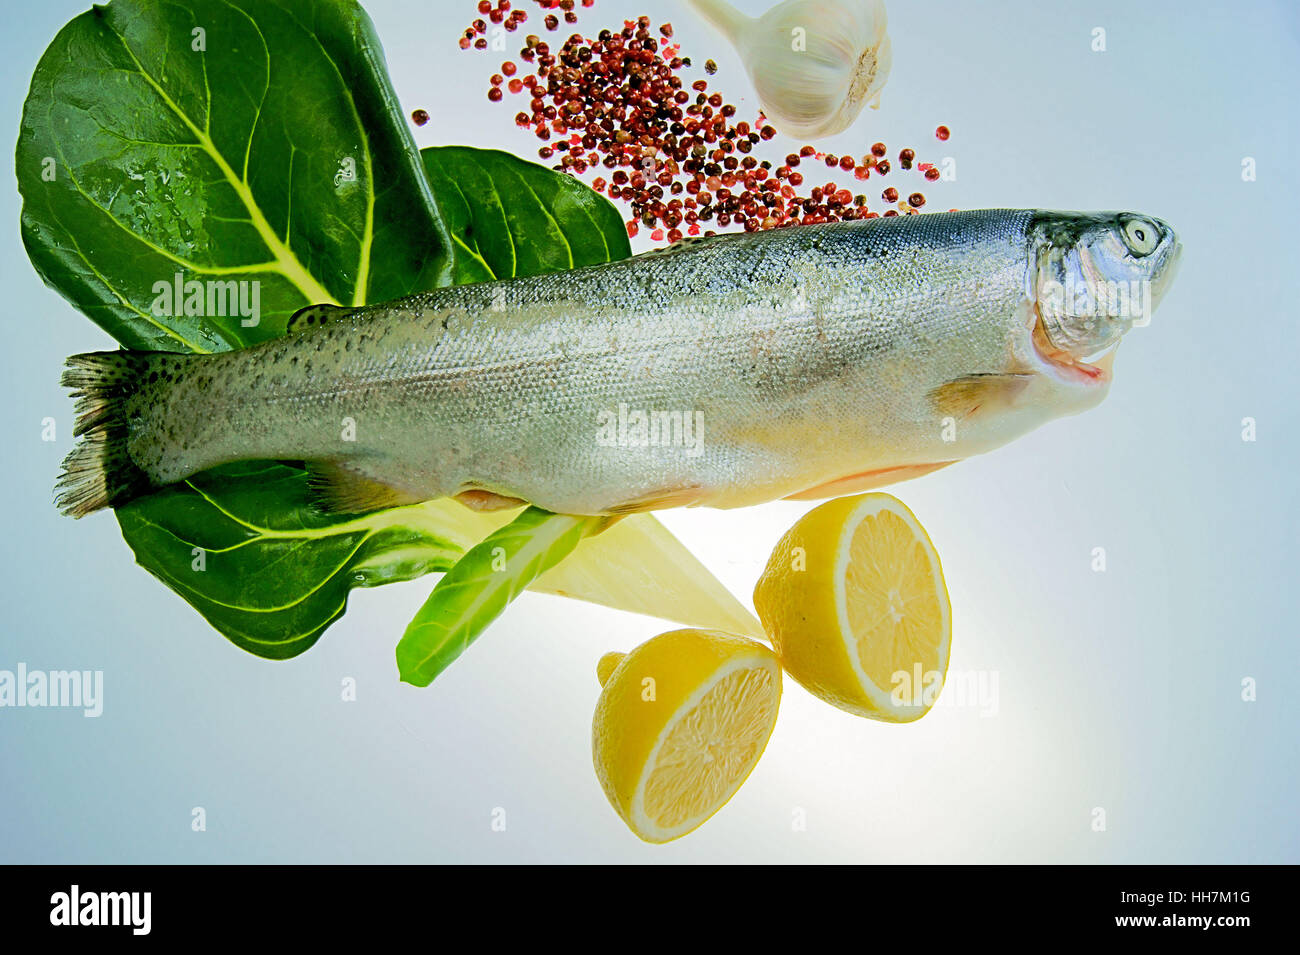 https://c8.alamy.com/comp/HH7M1G/fish-angle-fishing-trout-pisces-fishing-rod-trouts-food-aliment-HH7M1G.jpg